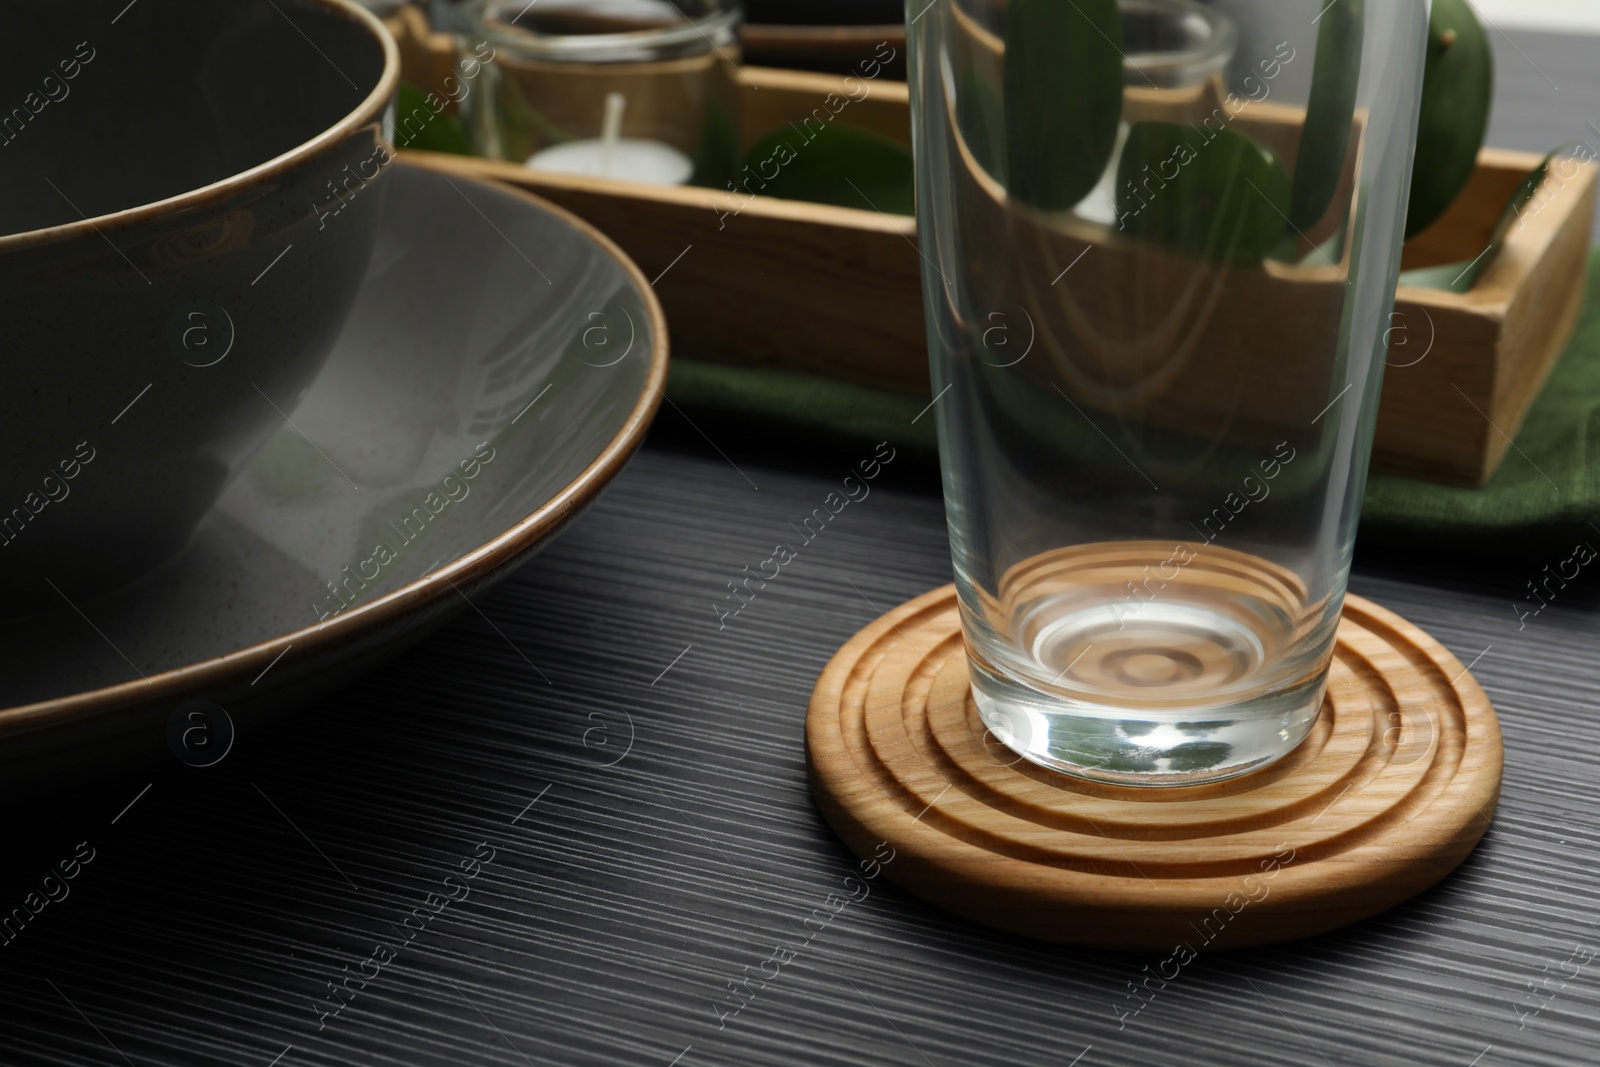 Photo of Place setting with glass and drink coaster on black wooden table, closeup view